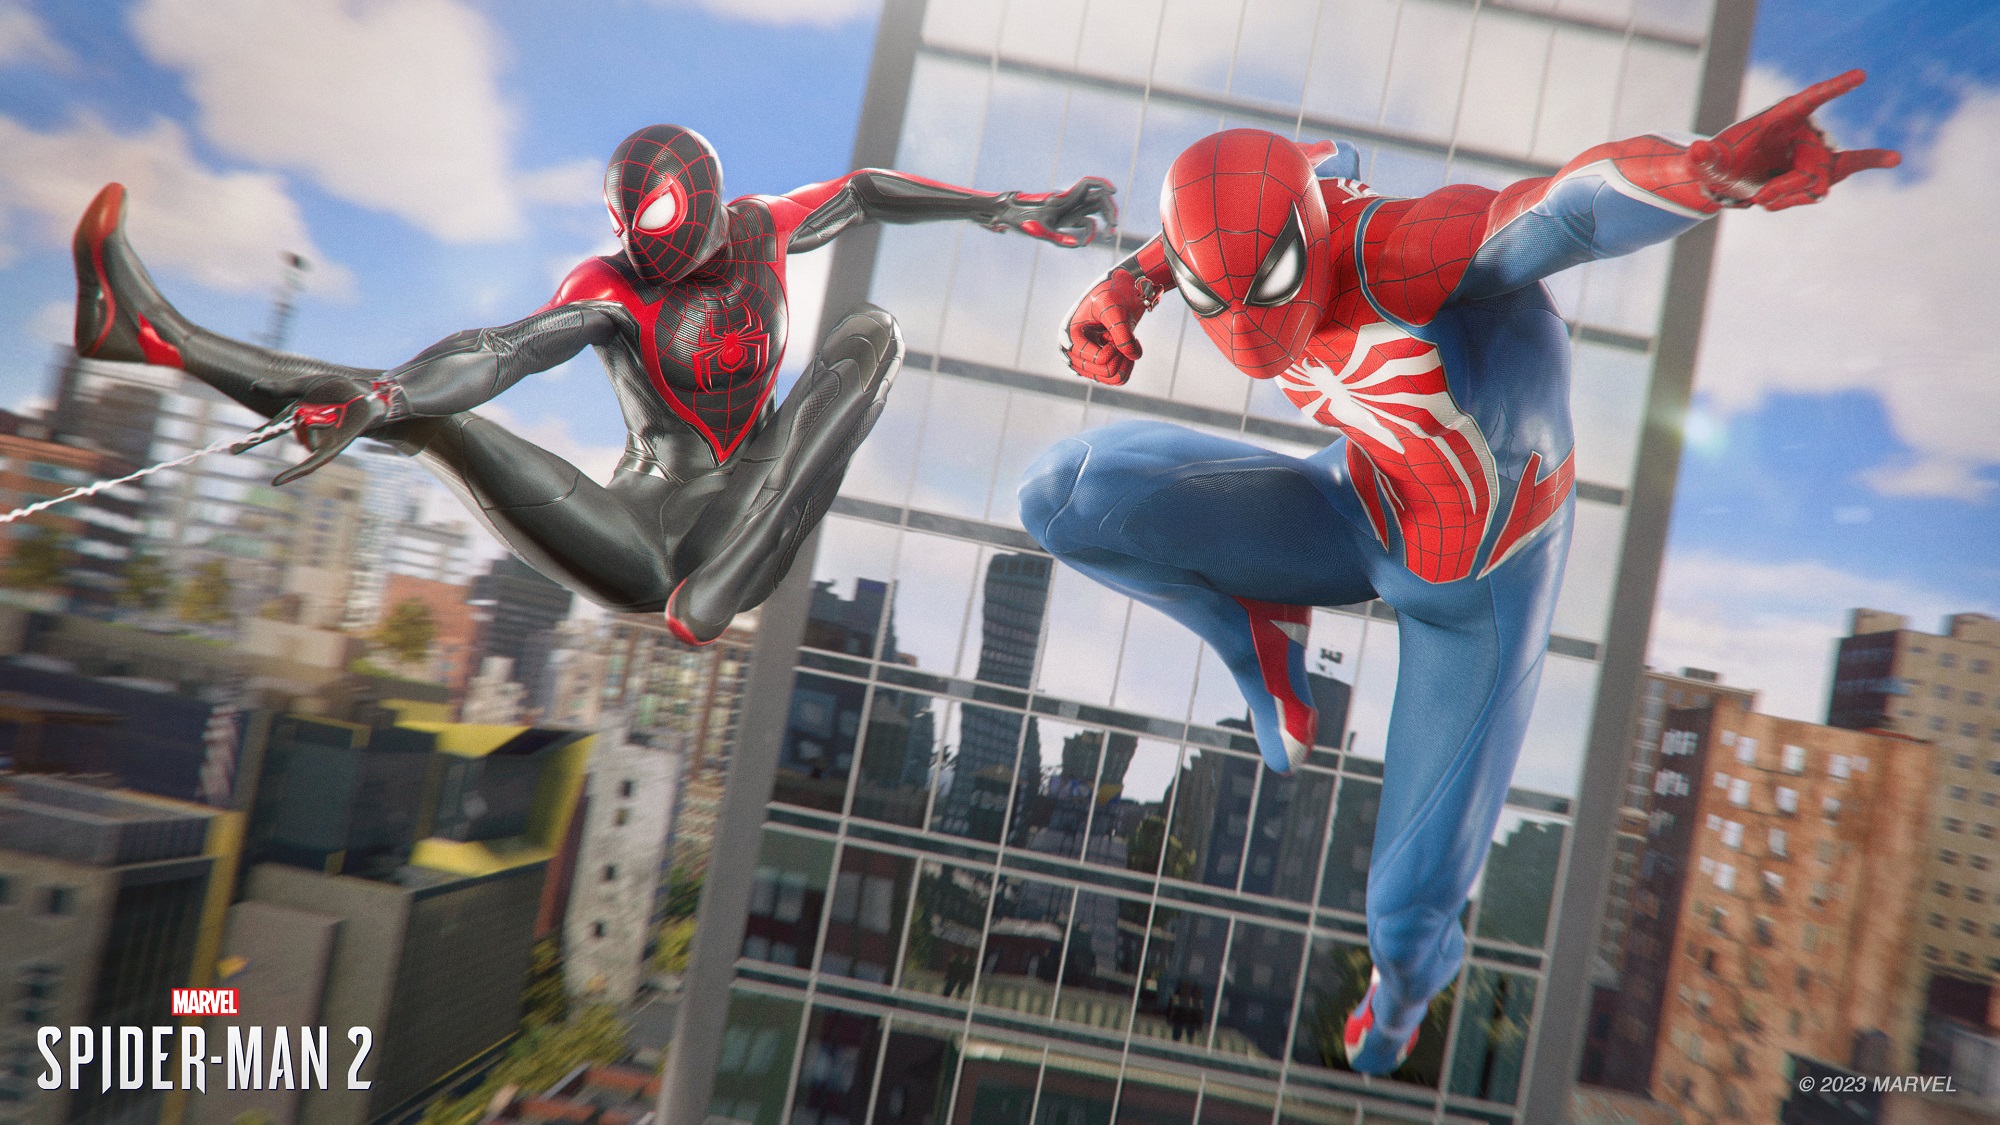 Marvel's Spider-Man 2: Release Date and All Pre-Order Details